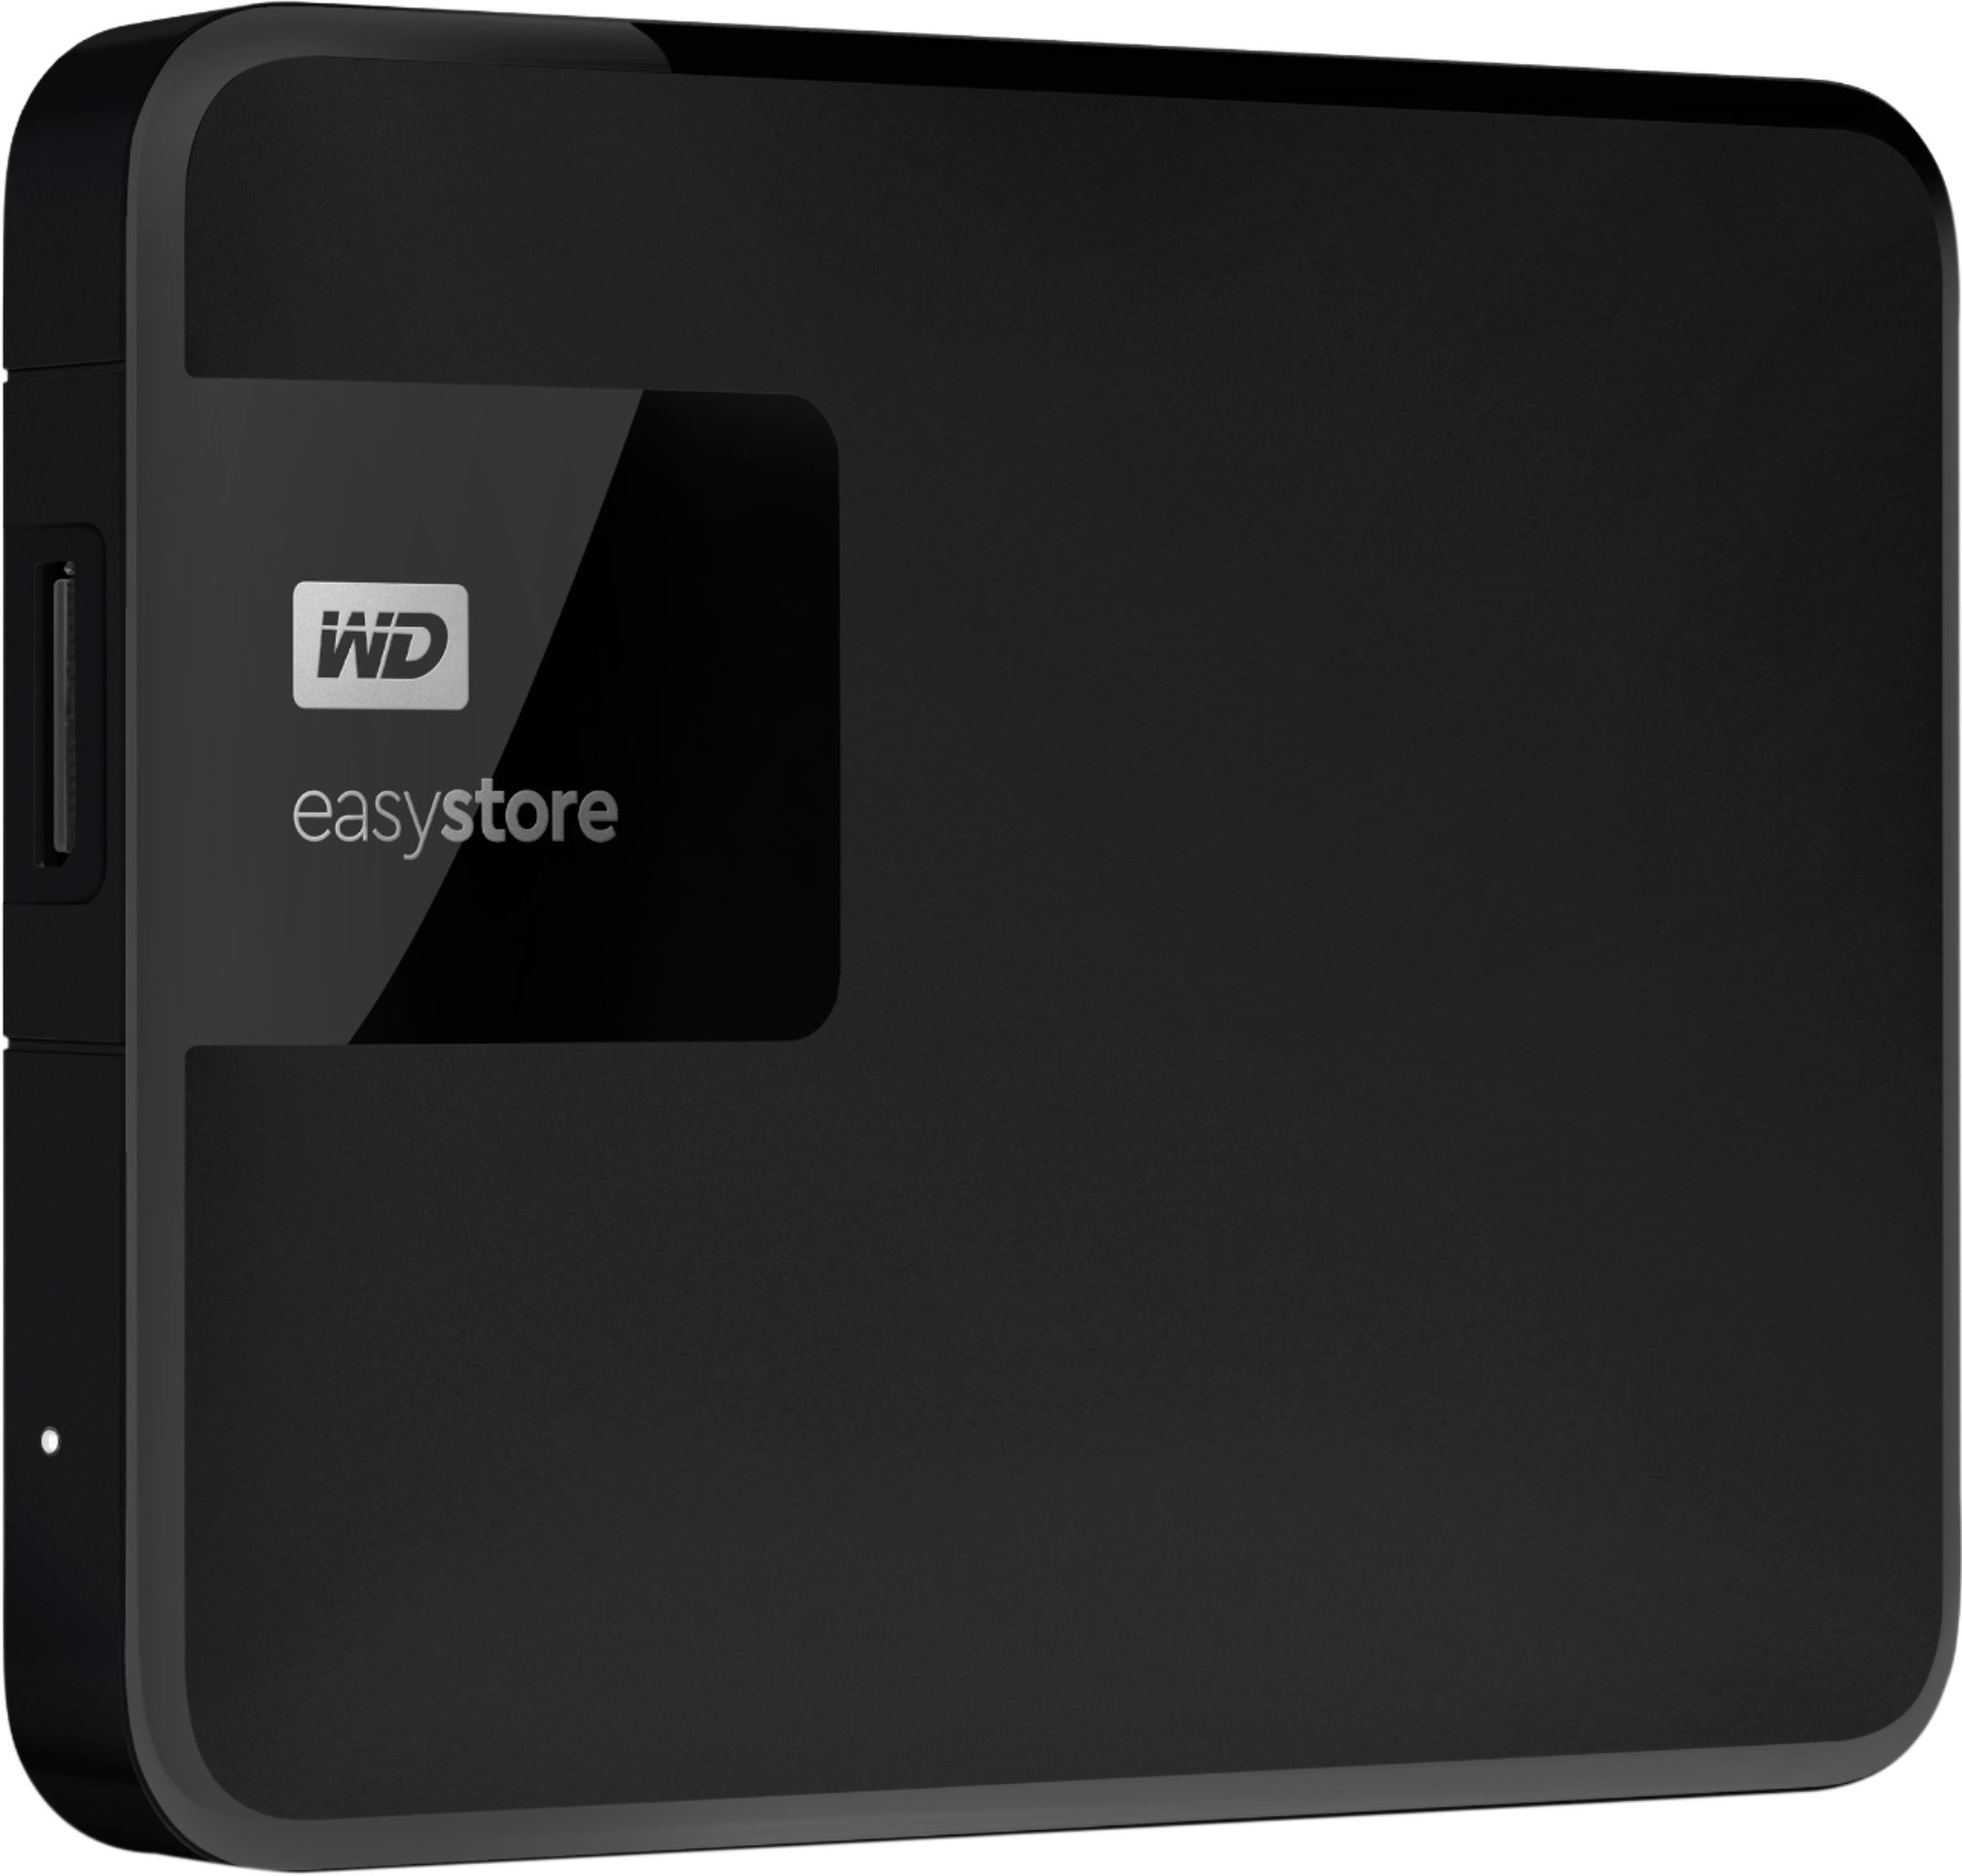 Questions and Answers: WD Easystore 5TB USB 3.0 External Portable Hard